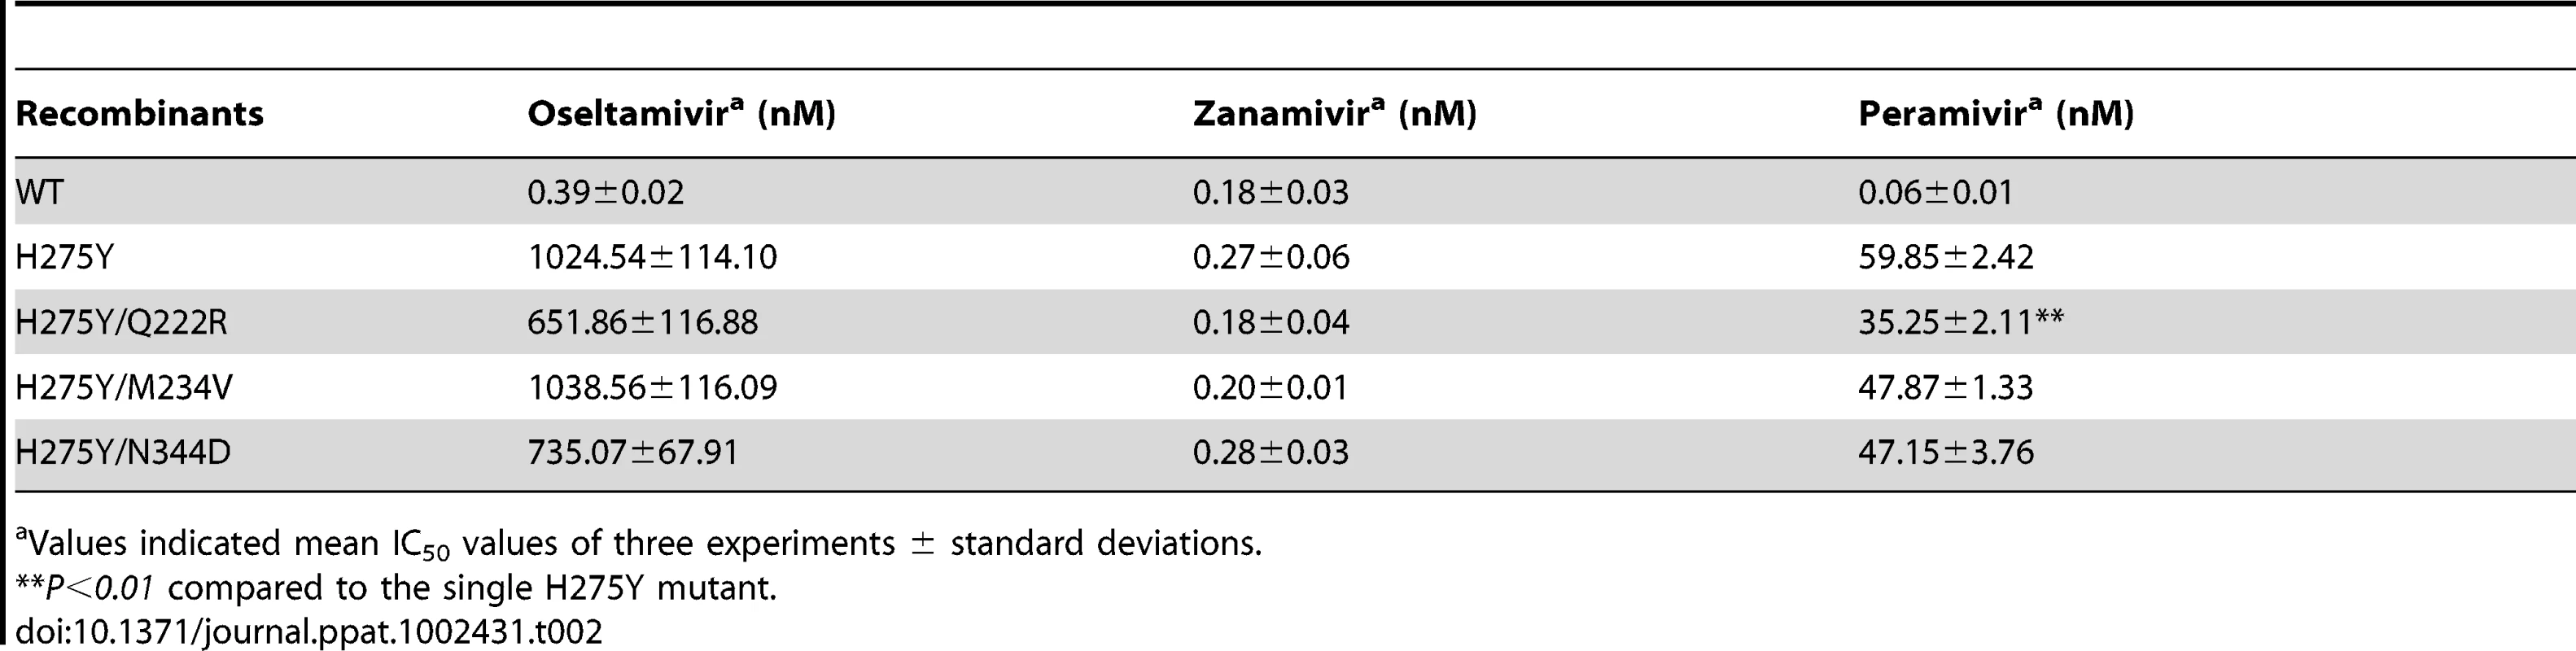 Susceptibility profiles of recombinant A/Brisbane/59/2007-like (H1N1) viruses against neuraminidase (NA) inhibitors as assessed by MUNANA NA inhibition assays.